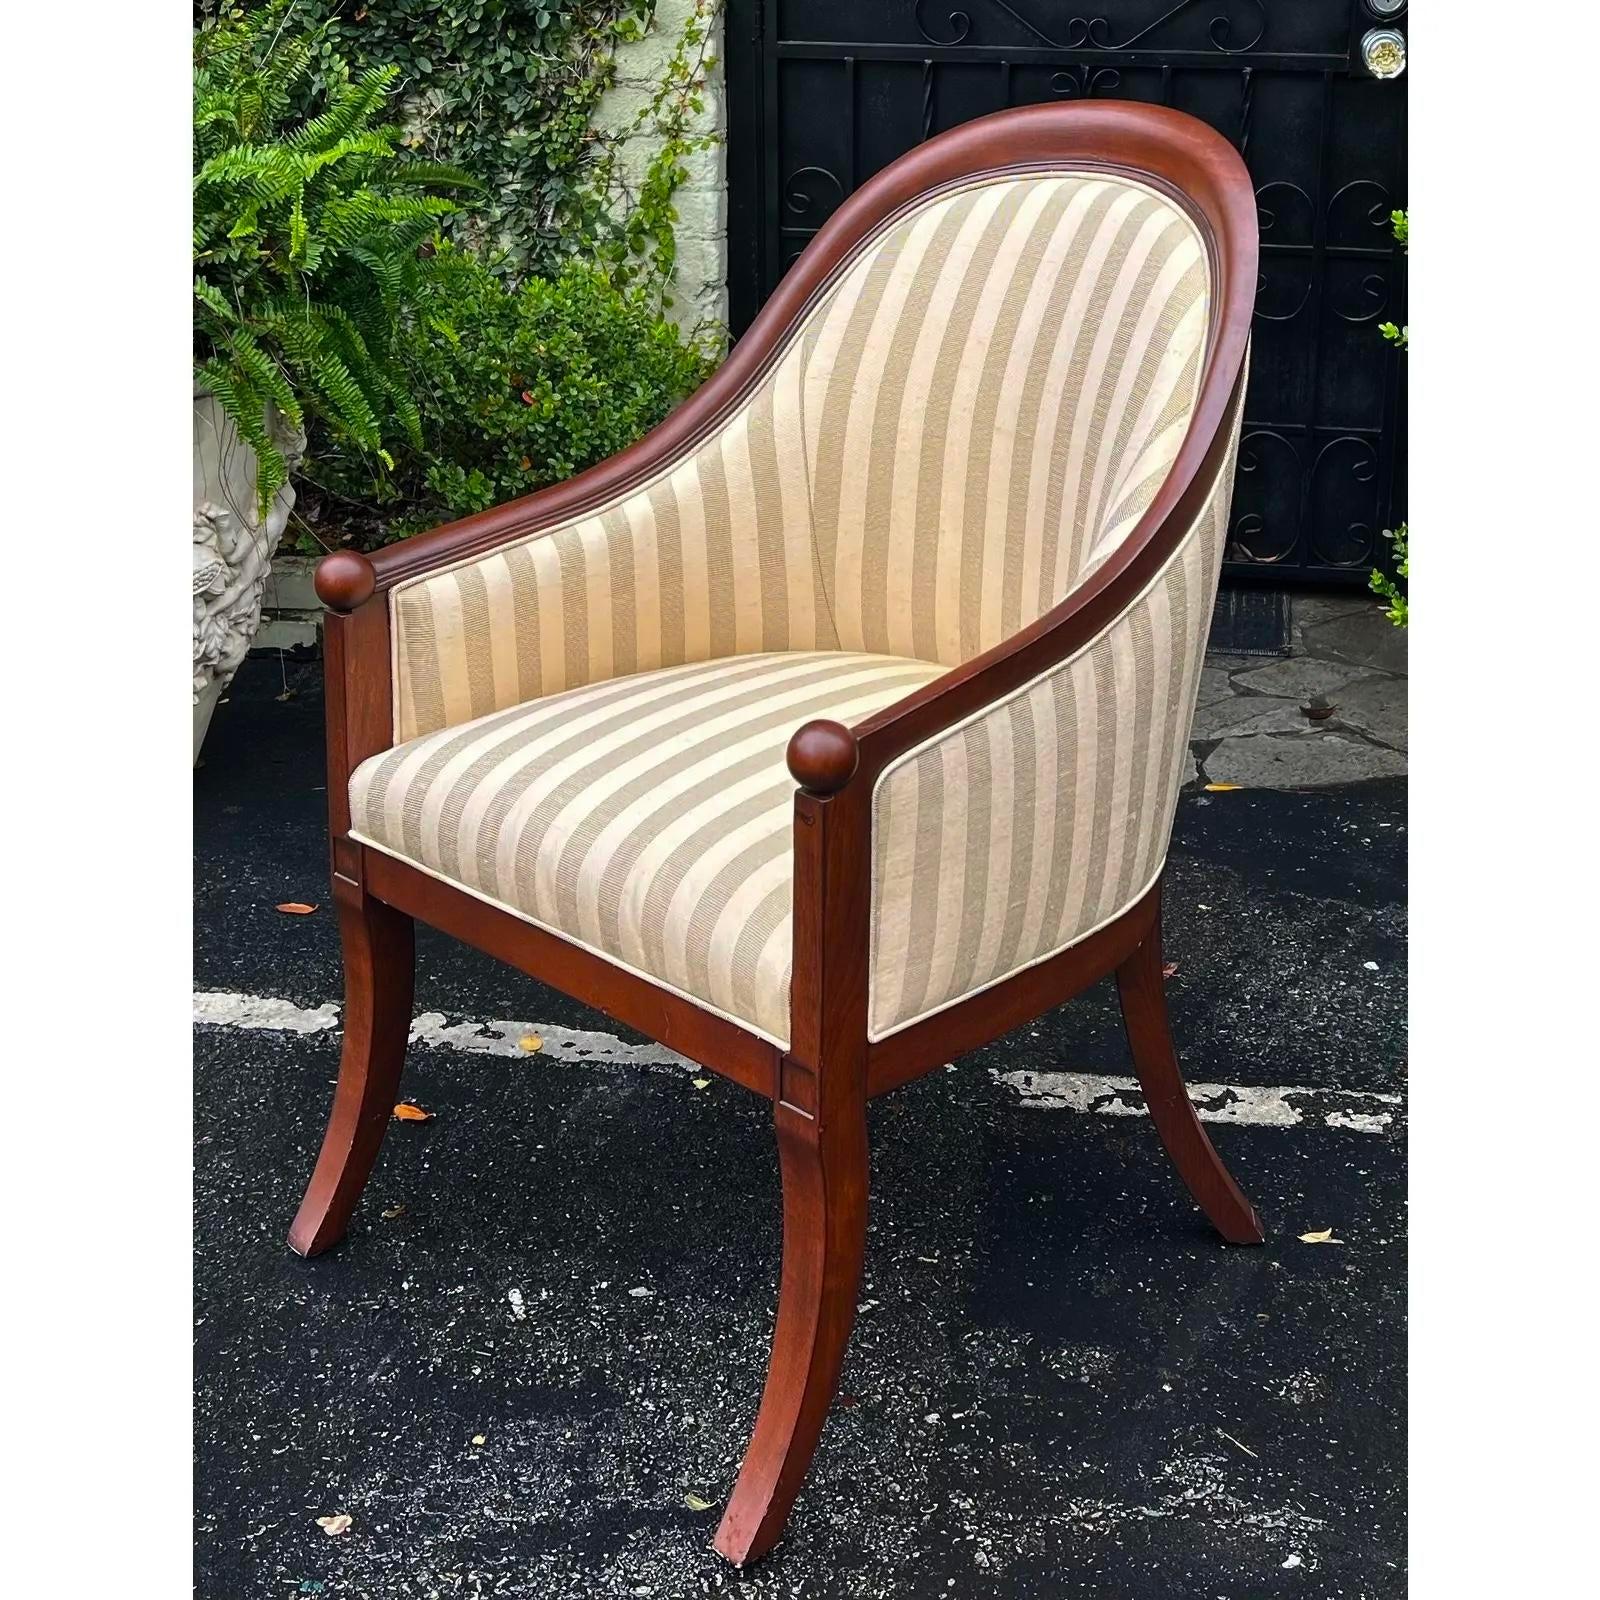 French Deco rose tarlow melrose house montpelier barrel club chair.